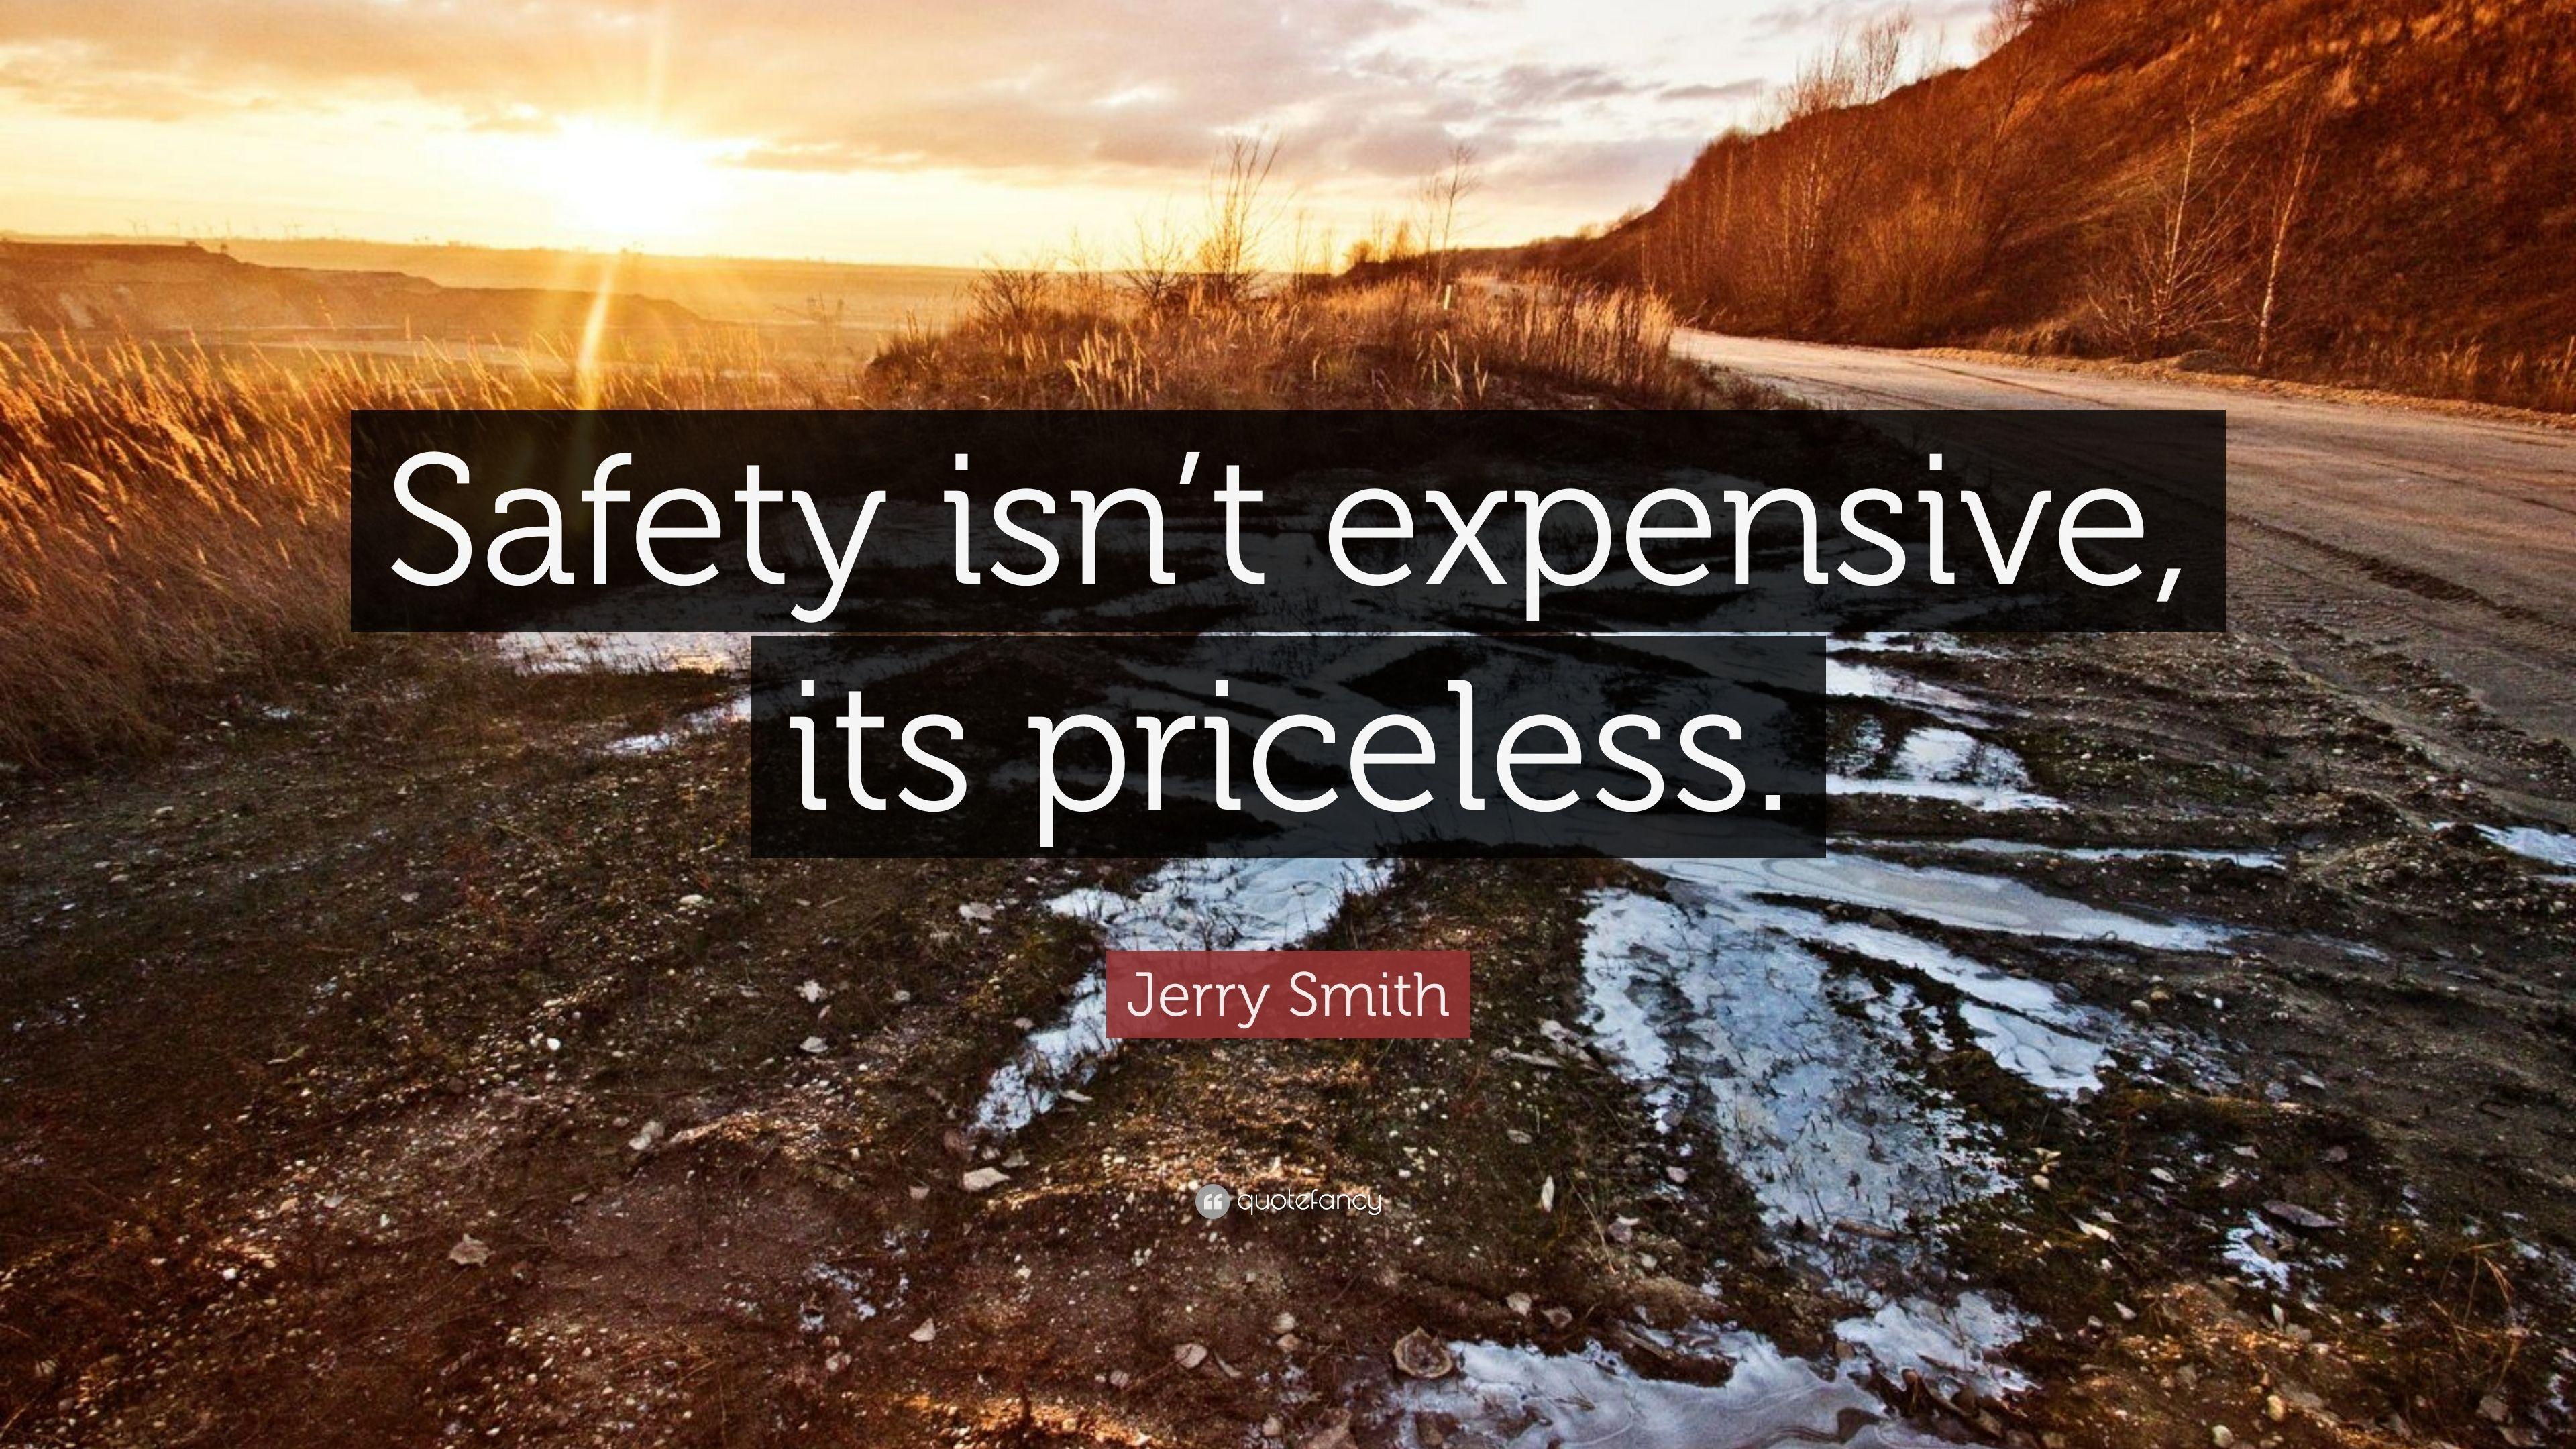 Jerry Smith Quote: “Safety isn't expensive, its priceless.” 5